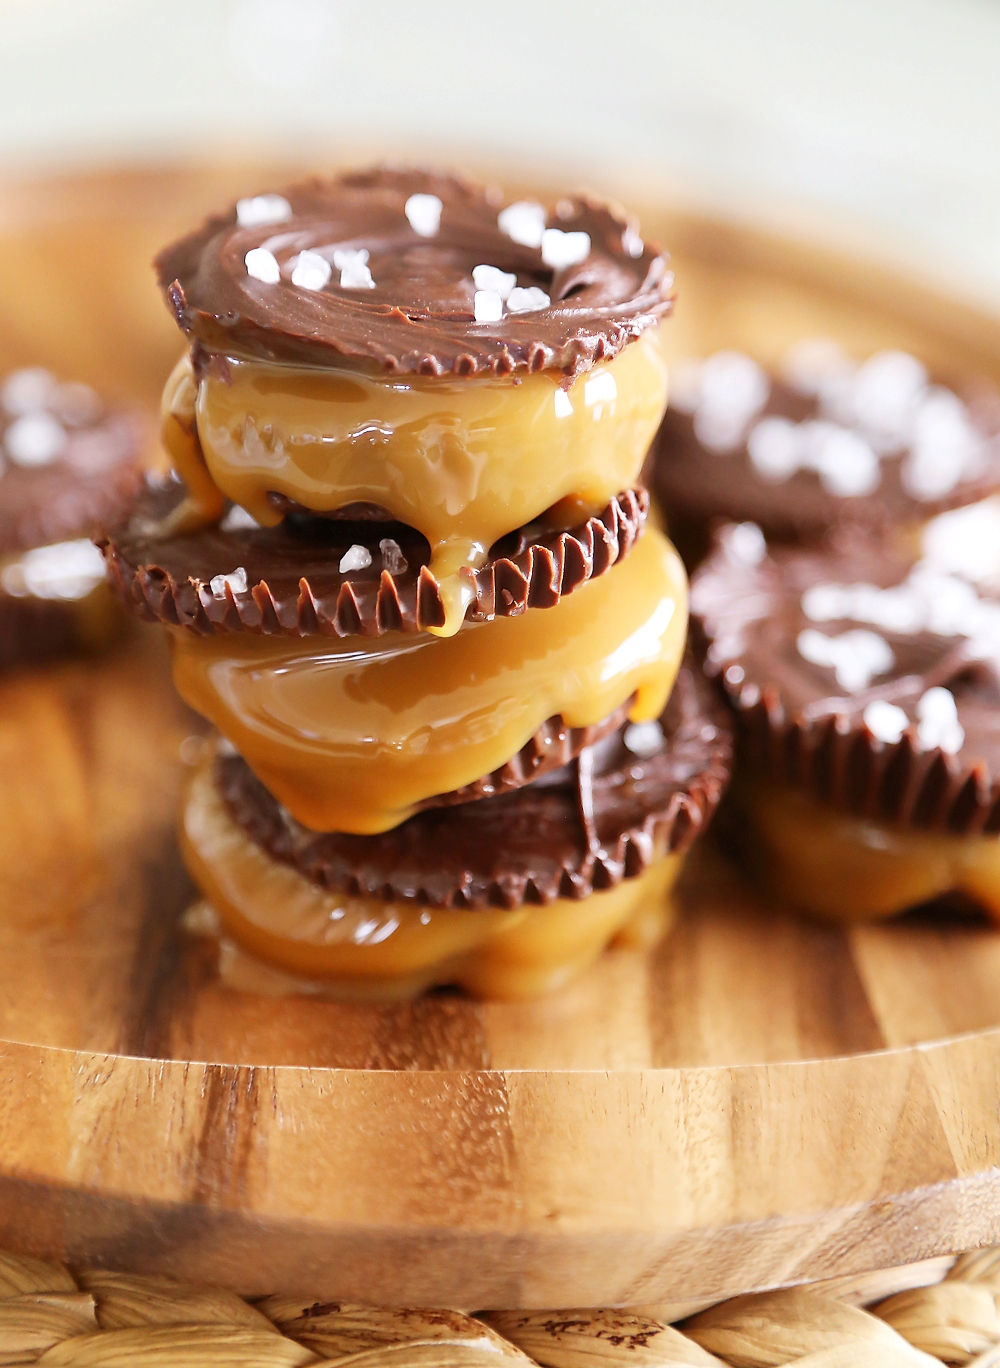 4-Ingredient Salted Caramel Chocolate Cups - Dark chocolate treats with creamy, rich caramel sauce and sea salt! SO good. Make full sized or mini! Thecomfortofcooking.com